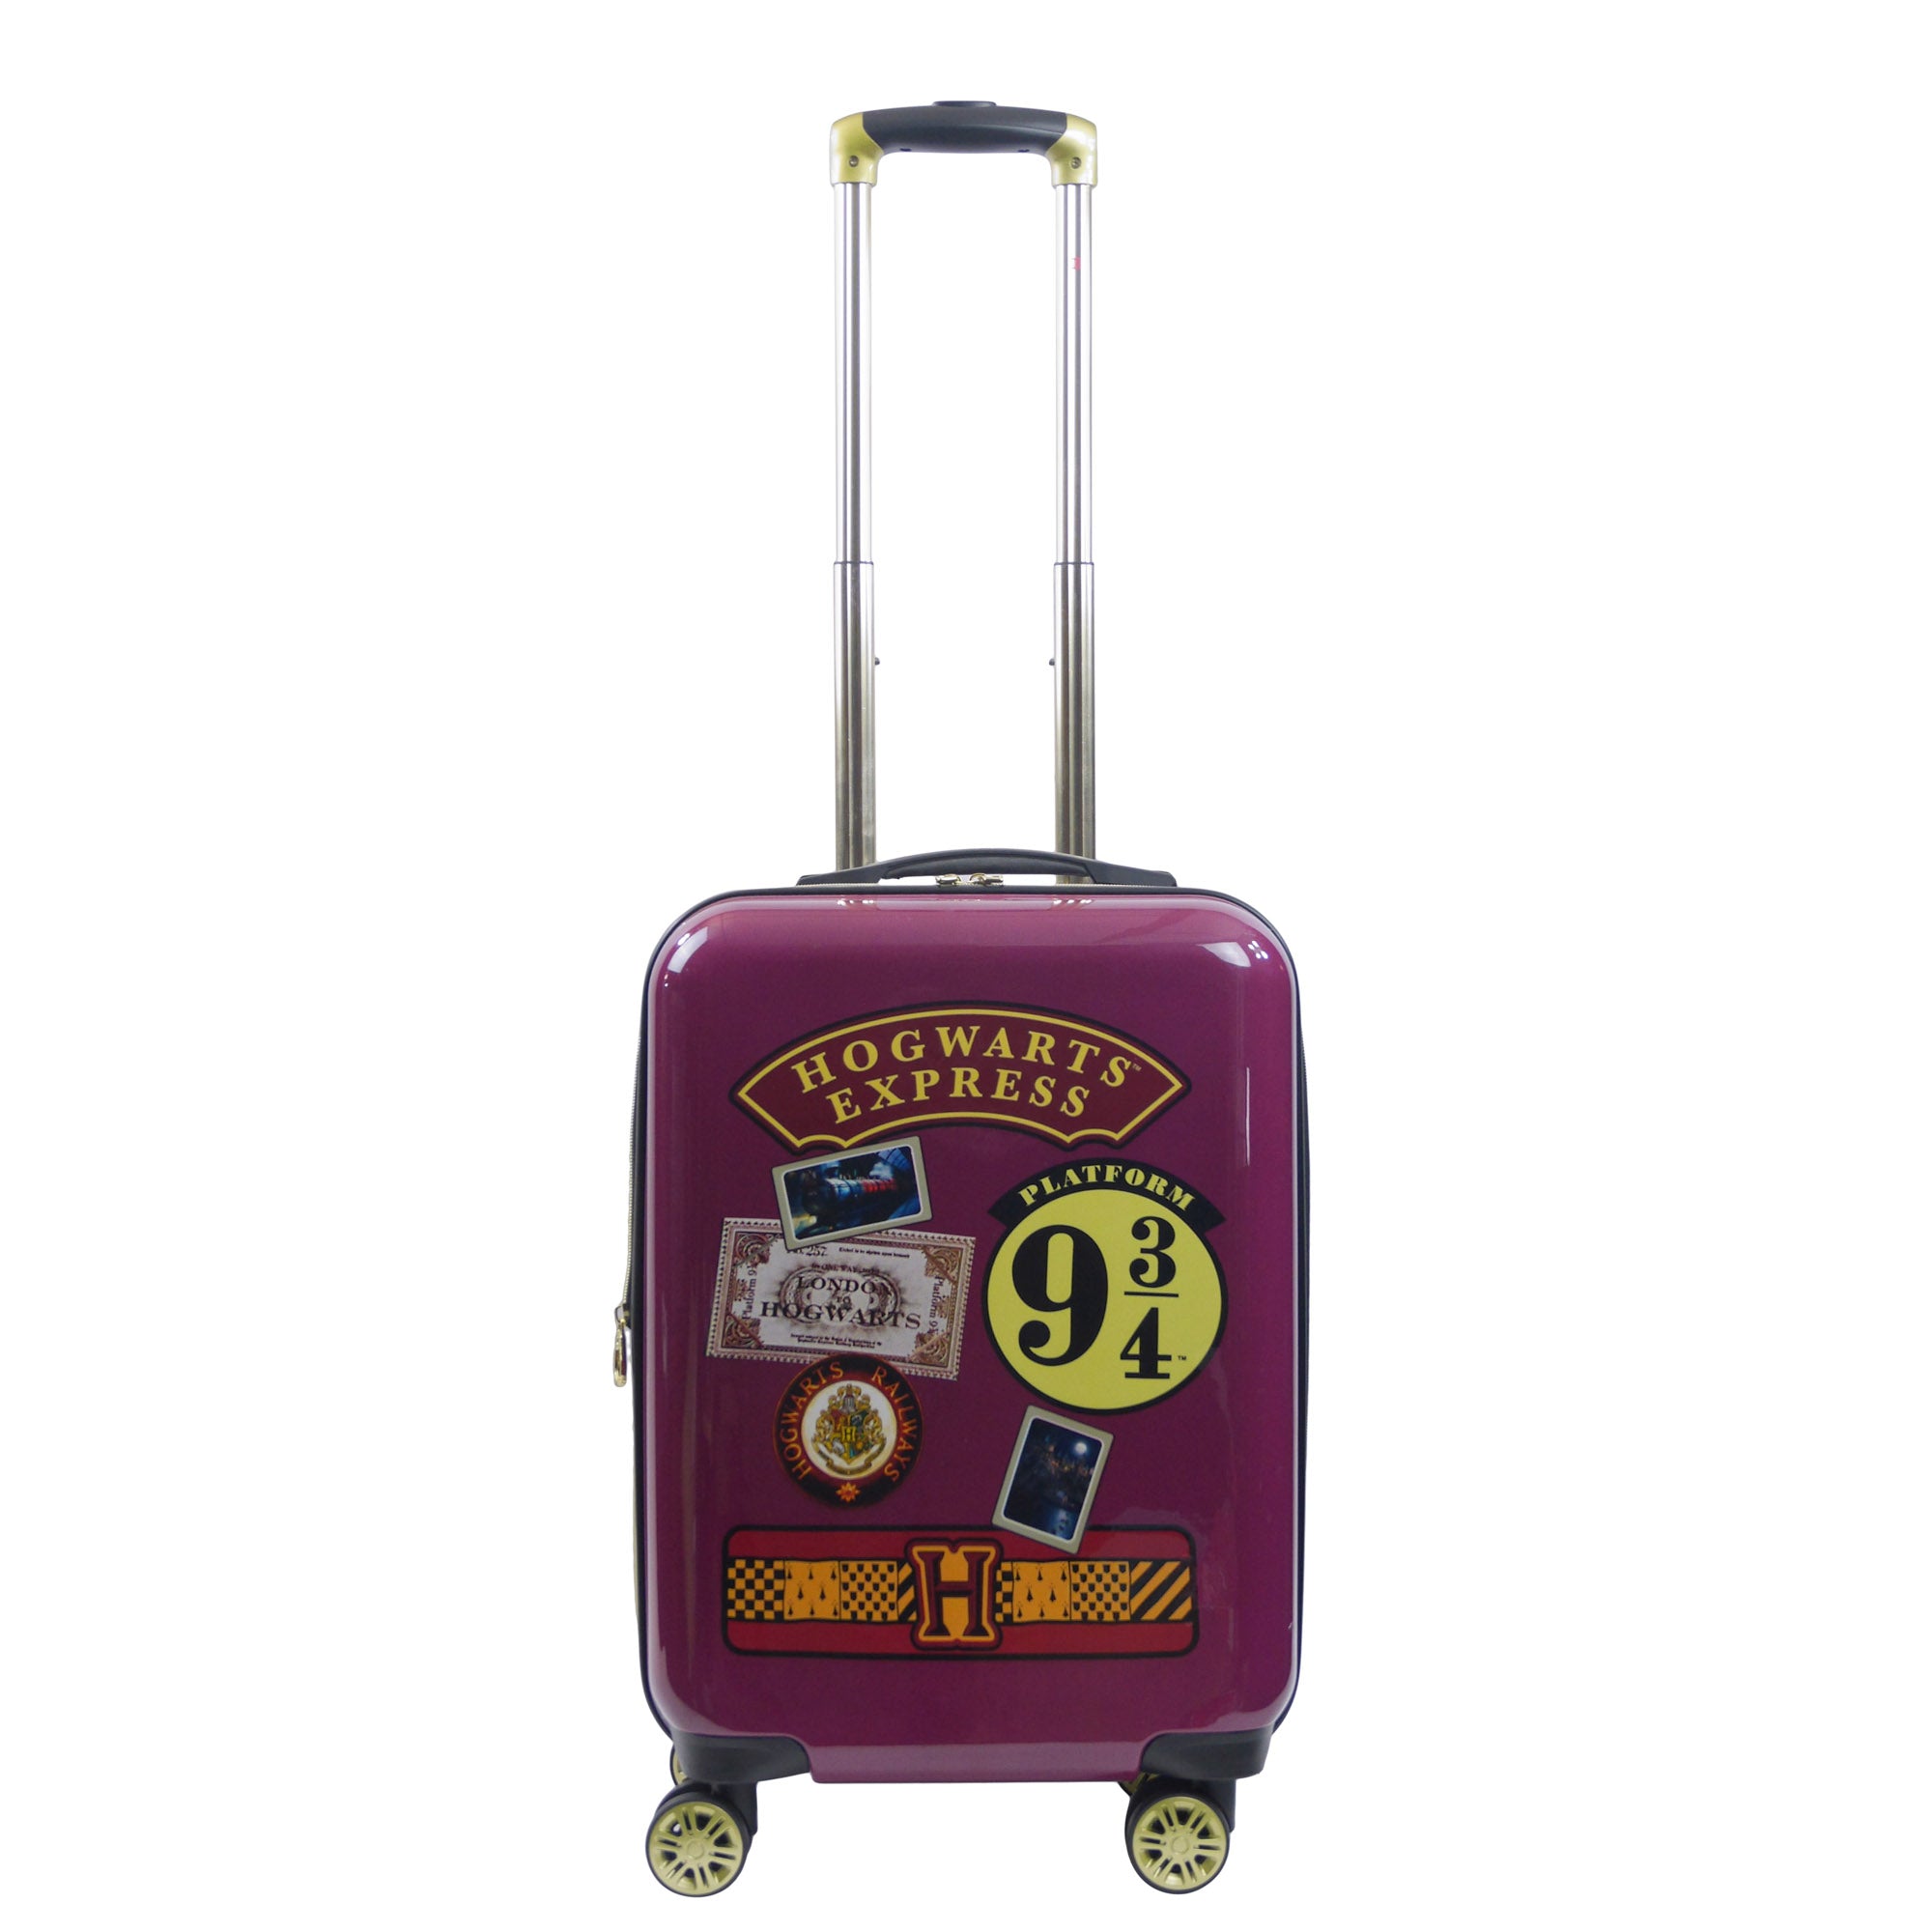 Harry Potter Hogwarts Express 21.5" carry-on suitcase Luggage Burgundy with 2" zipper gusset for expandable space - best spinner suitcase for traveling